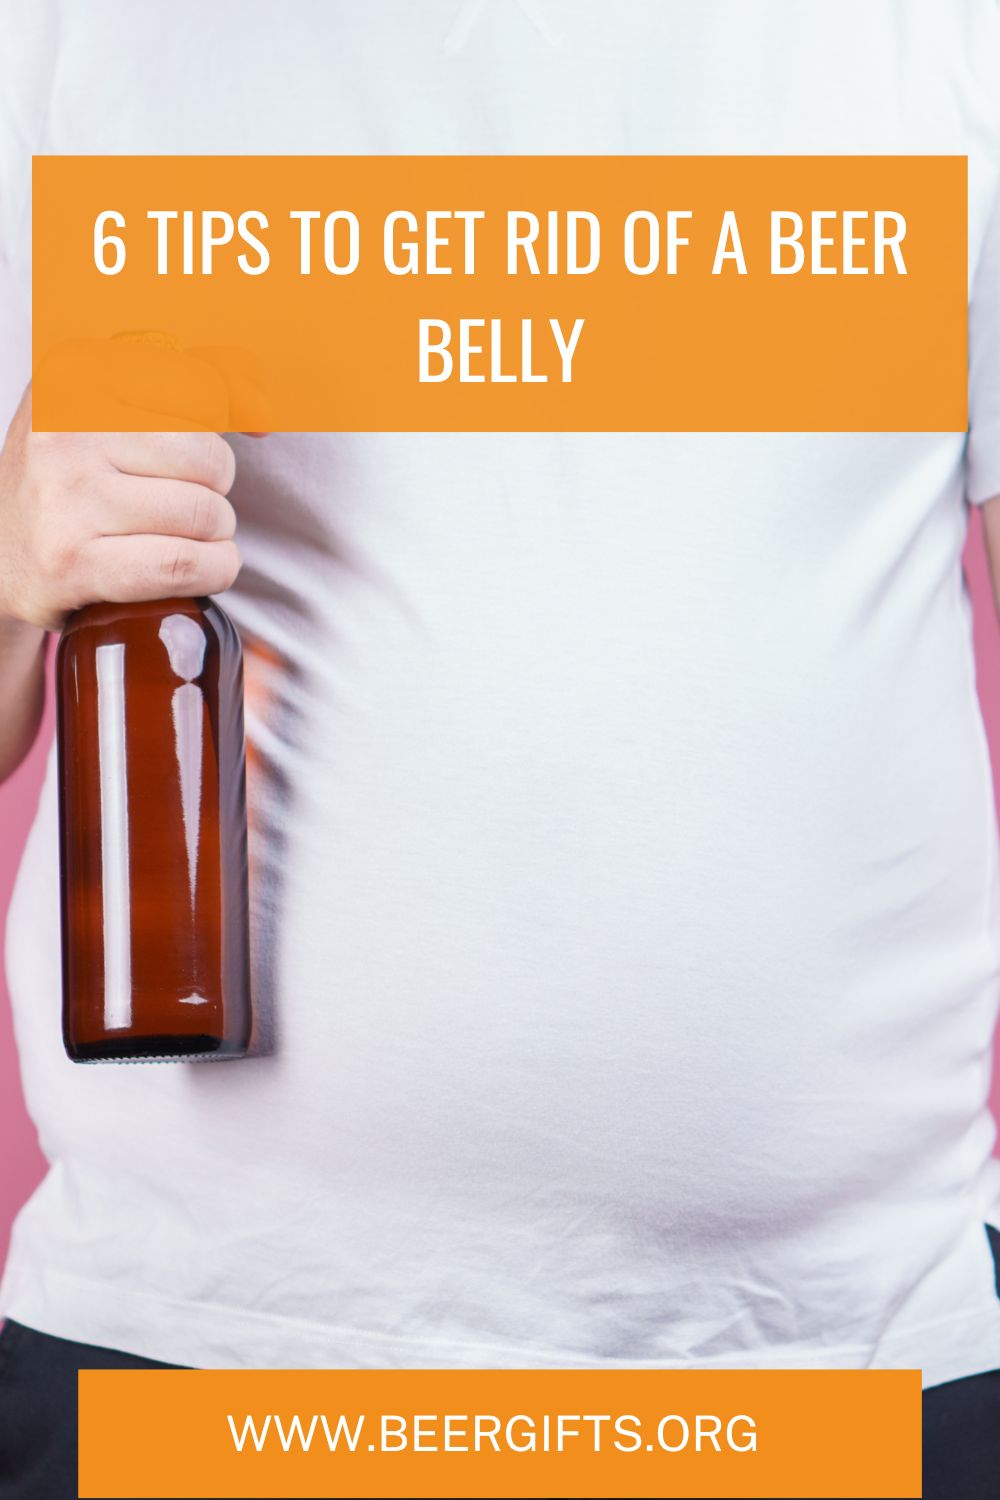 6 Tips to Get Rid of a Beer Belly8